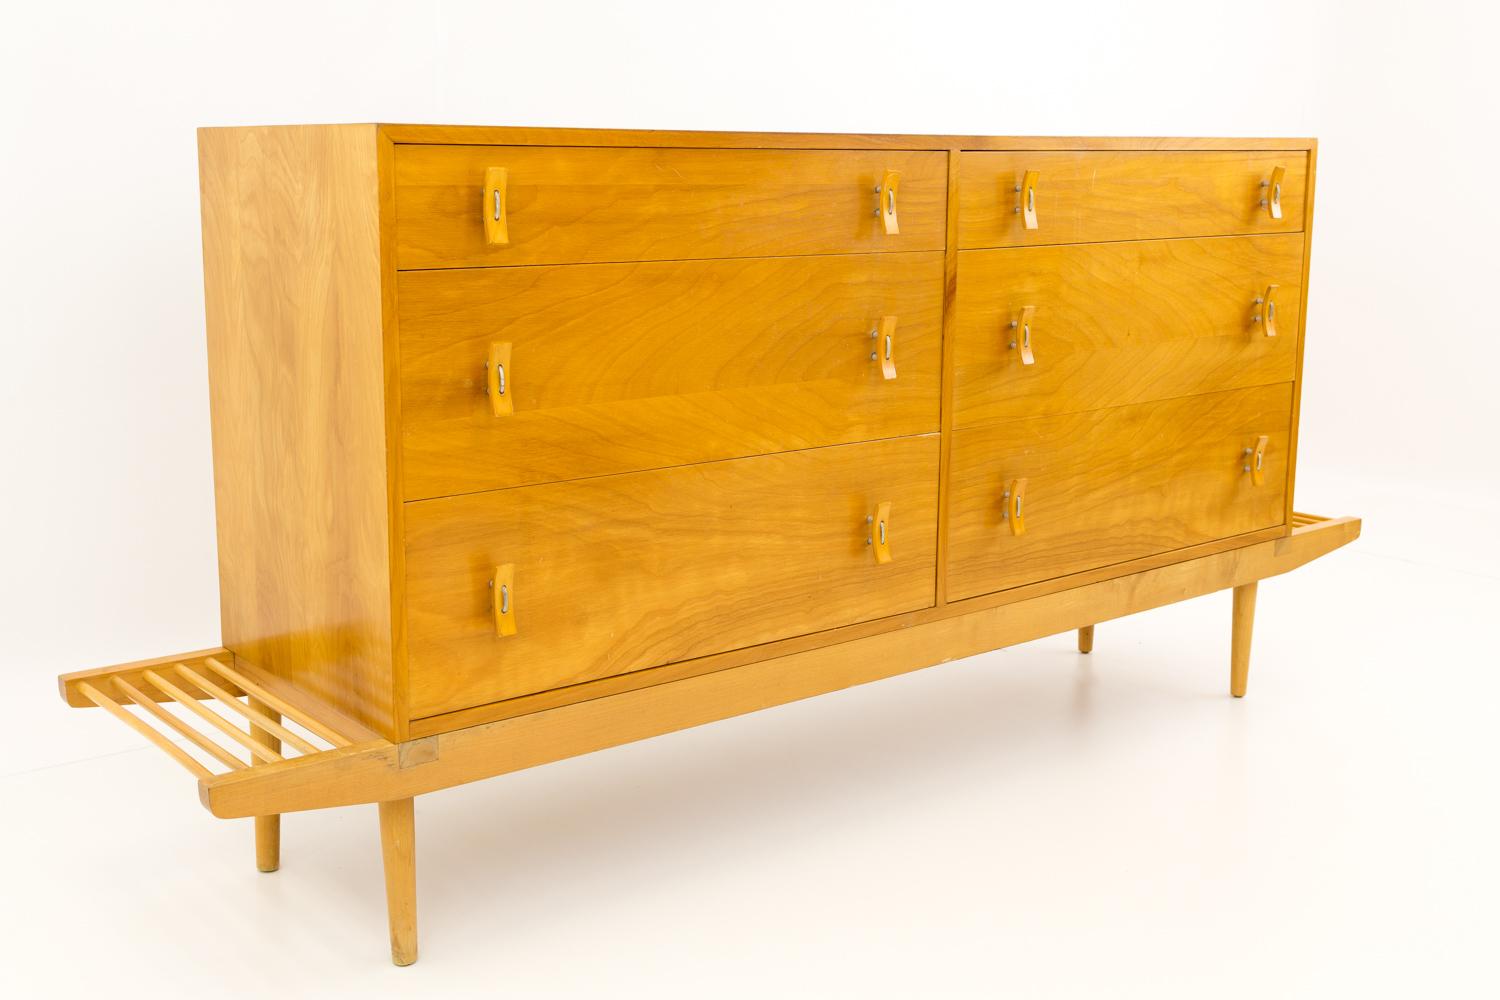 Stanley Young for Glenn of California Mid Century 6 drawer lowboy dresser on Bench

The bench measures 81 long x 18 deep x 11 high and the cabinet that sits on it is 64.75 long x 18 deep x 25.5 high. Overall the piece is 36.5 inches high

All